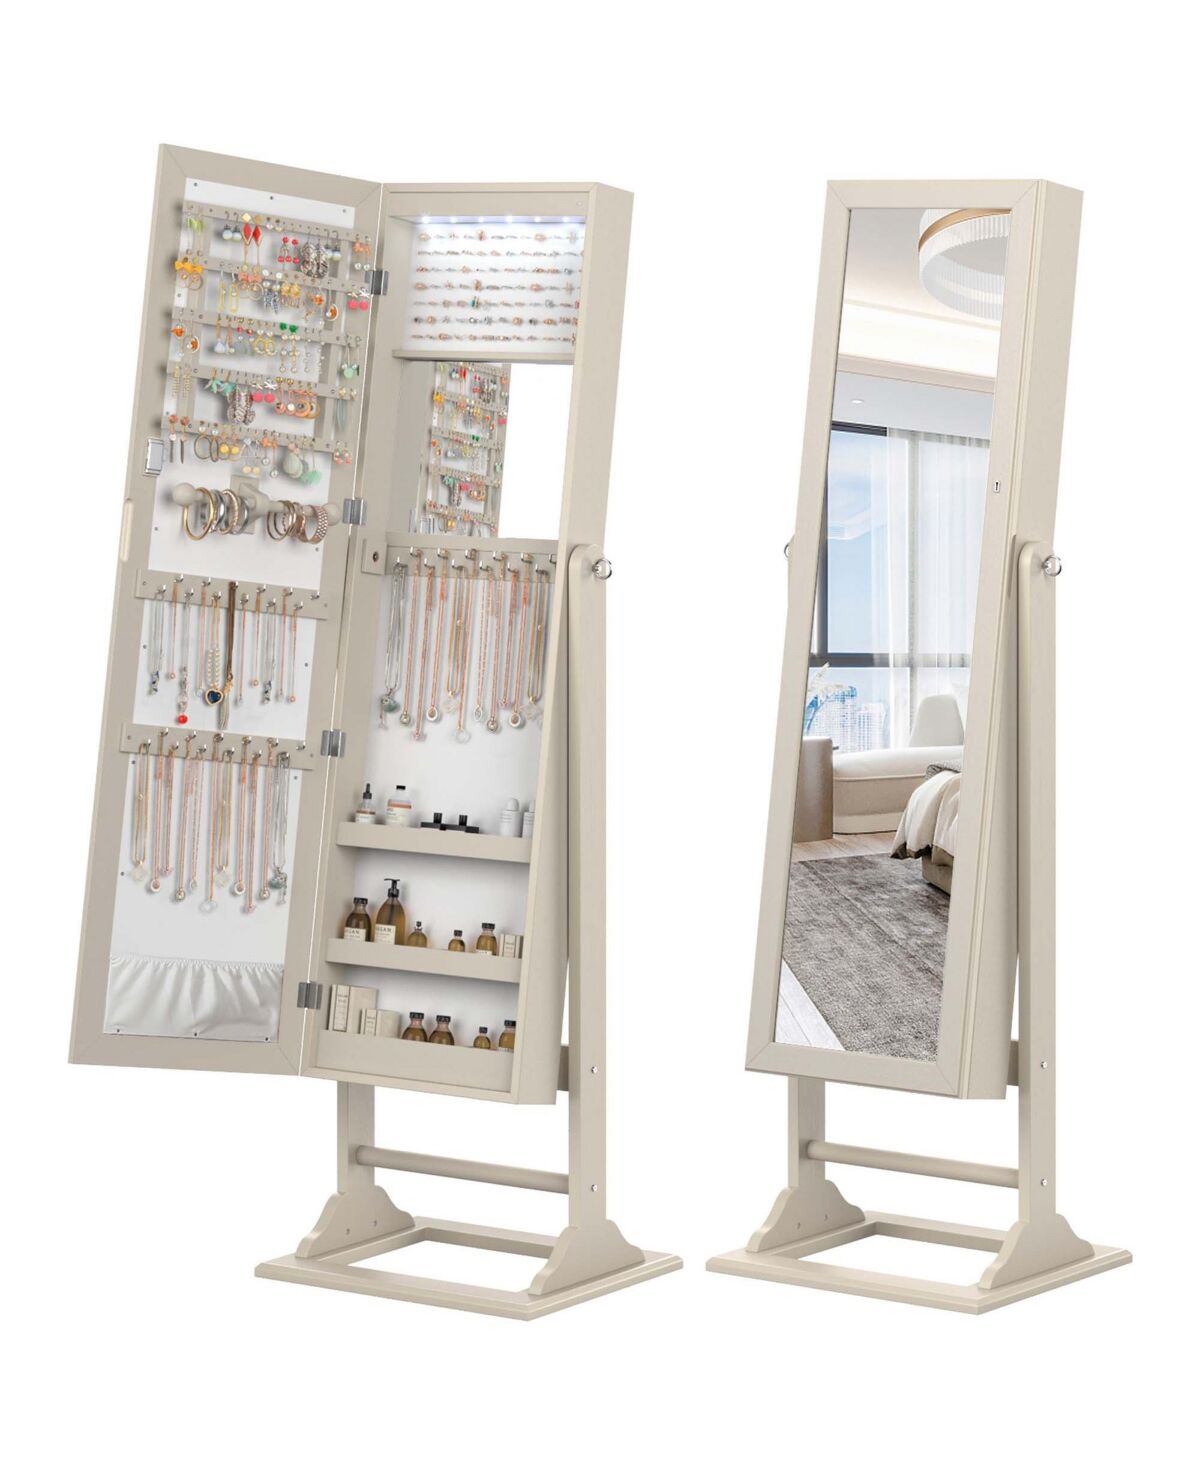 Costway Jewelry Cabinet Full-Length Mirror Lockable Jewelry Armoire with 6 Lights - Beige/khaki